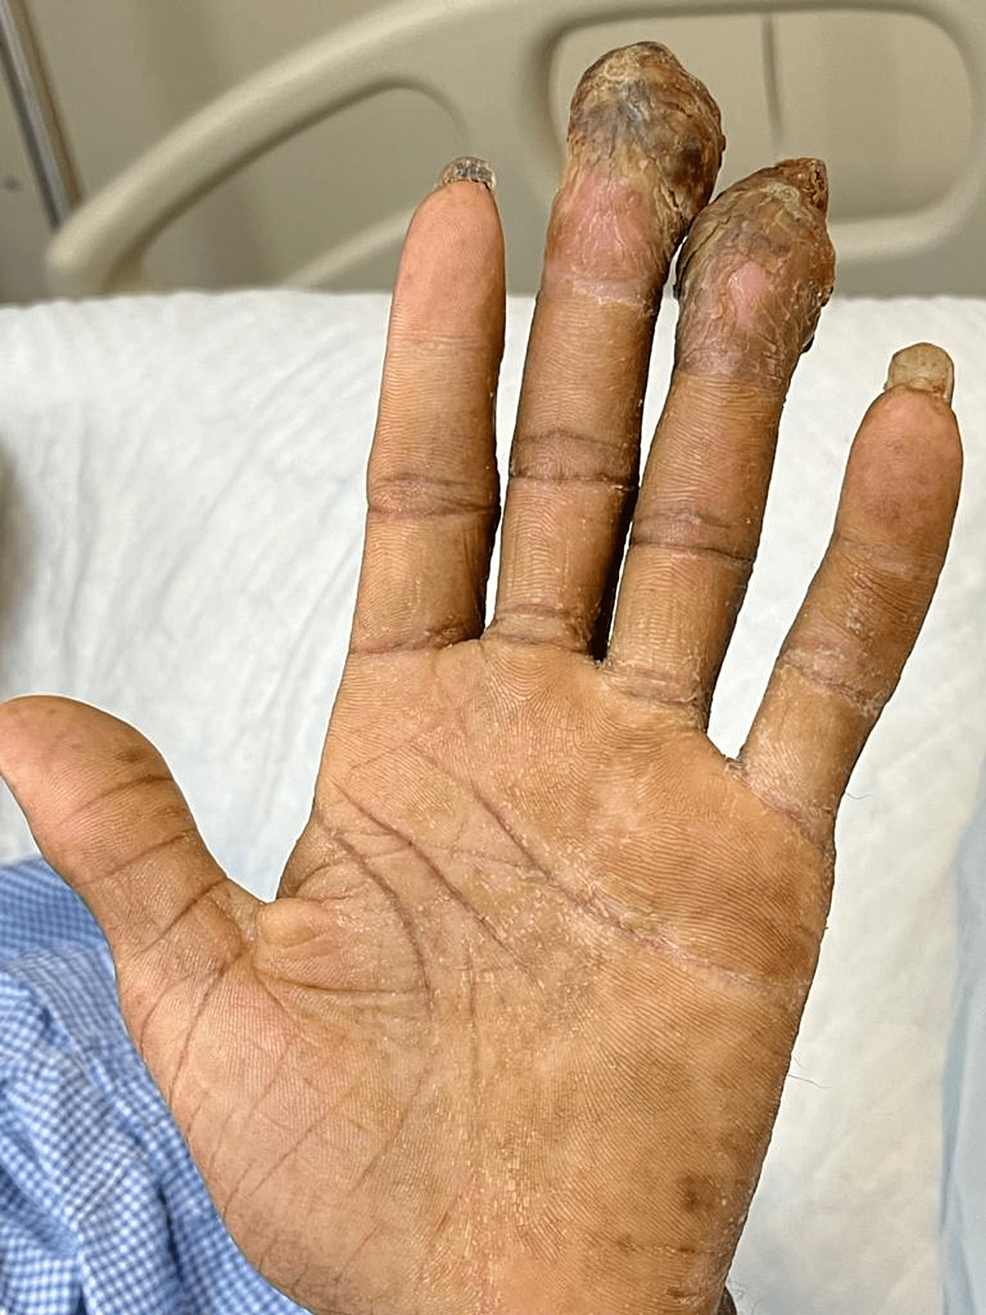 3 unusual symptoms of Omicron infection that show on your skin